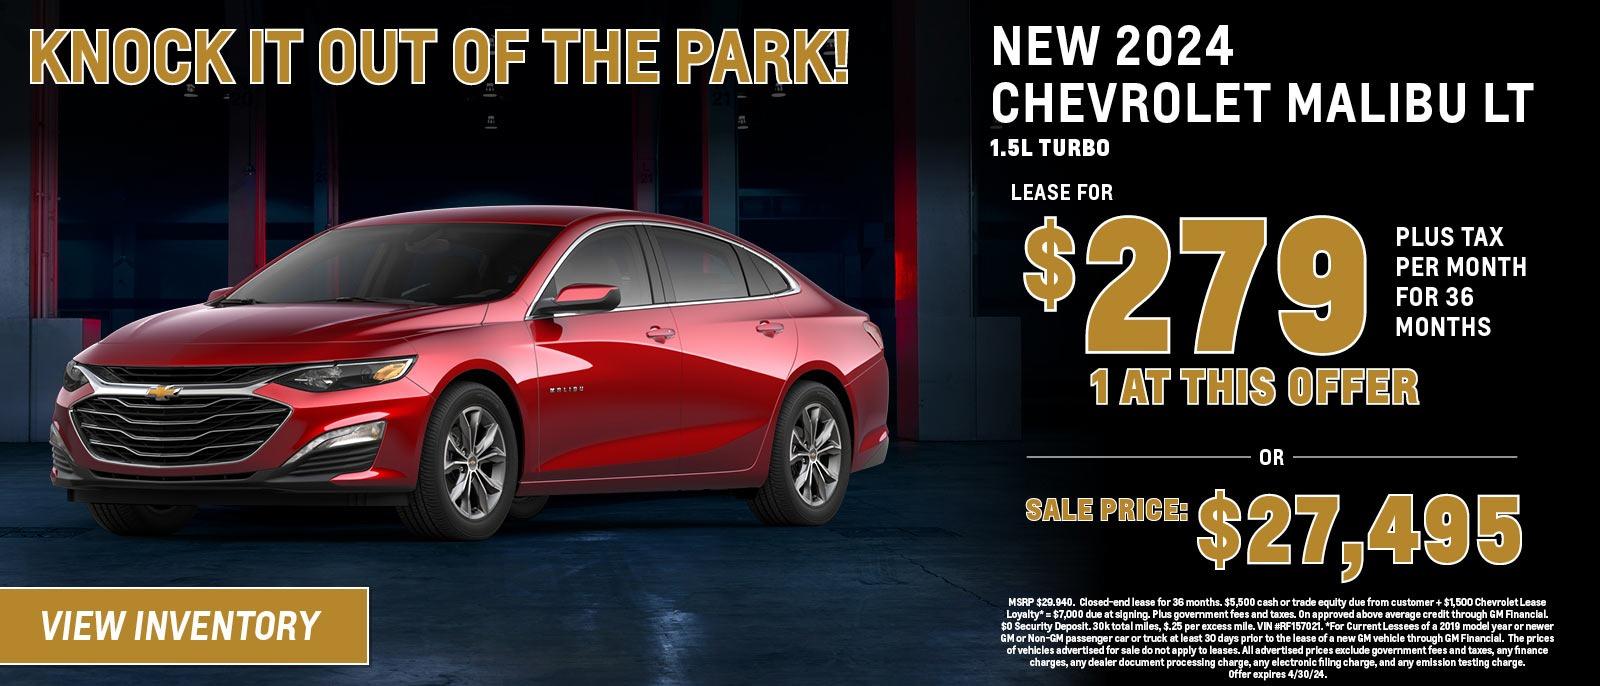 New 2024 Chevrolet Malibu LT
Lease for $279/36 months plus tax or Sale price $27,495
1 at this offer